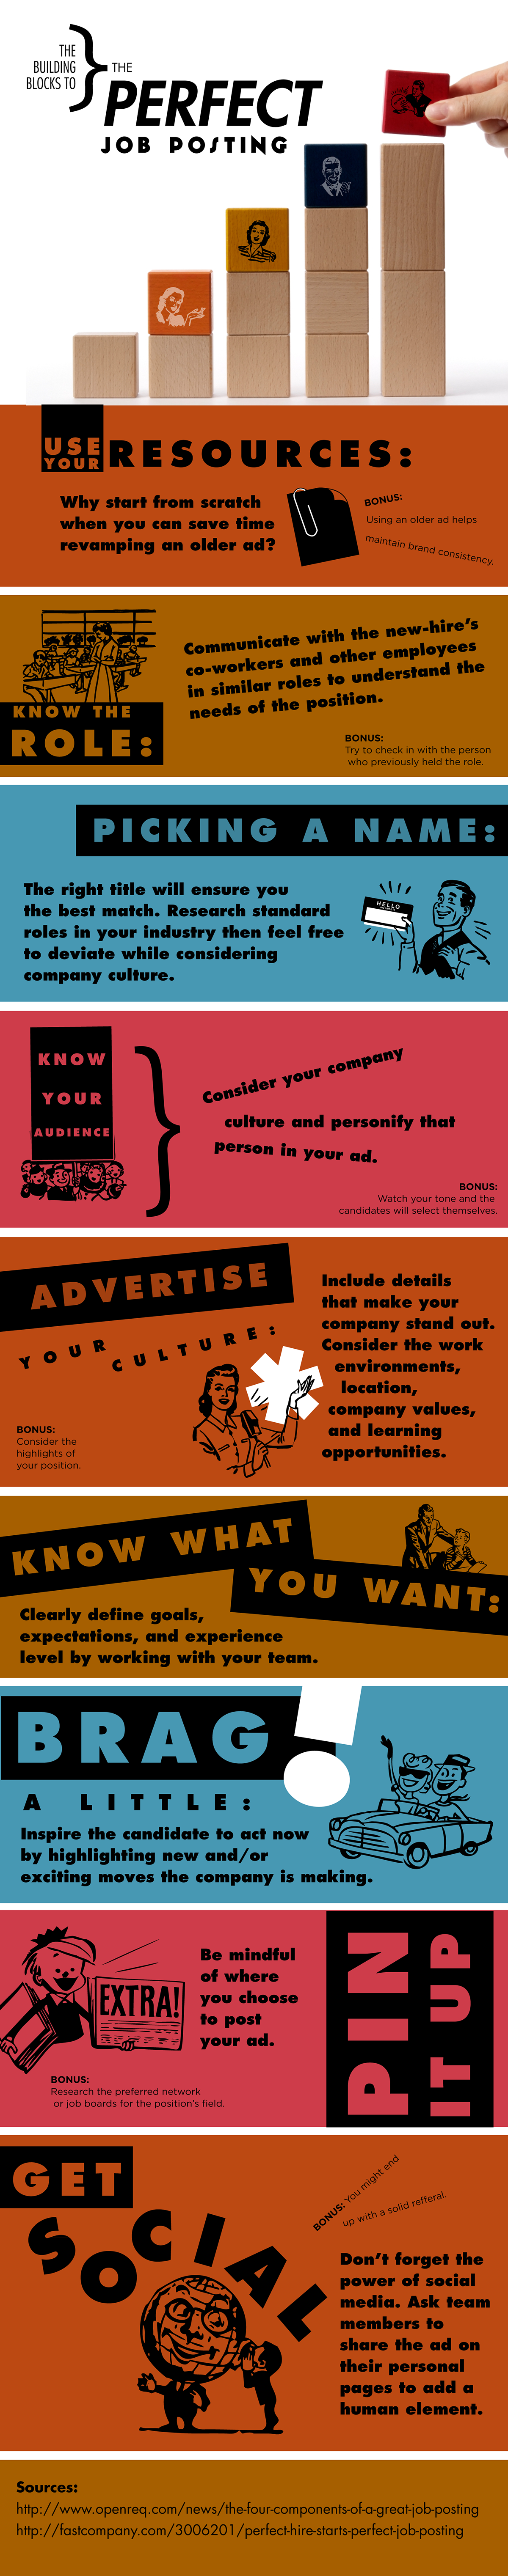 job new hire Posting how to infographic timed vintage FUTURISM